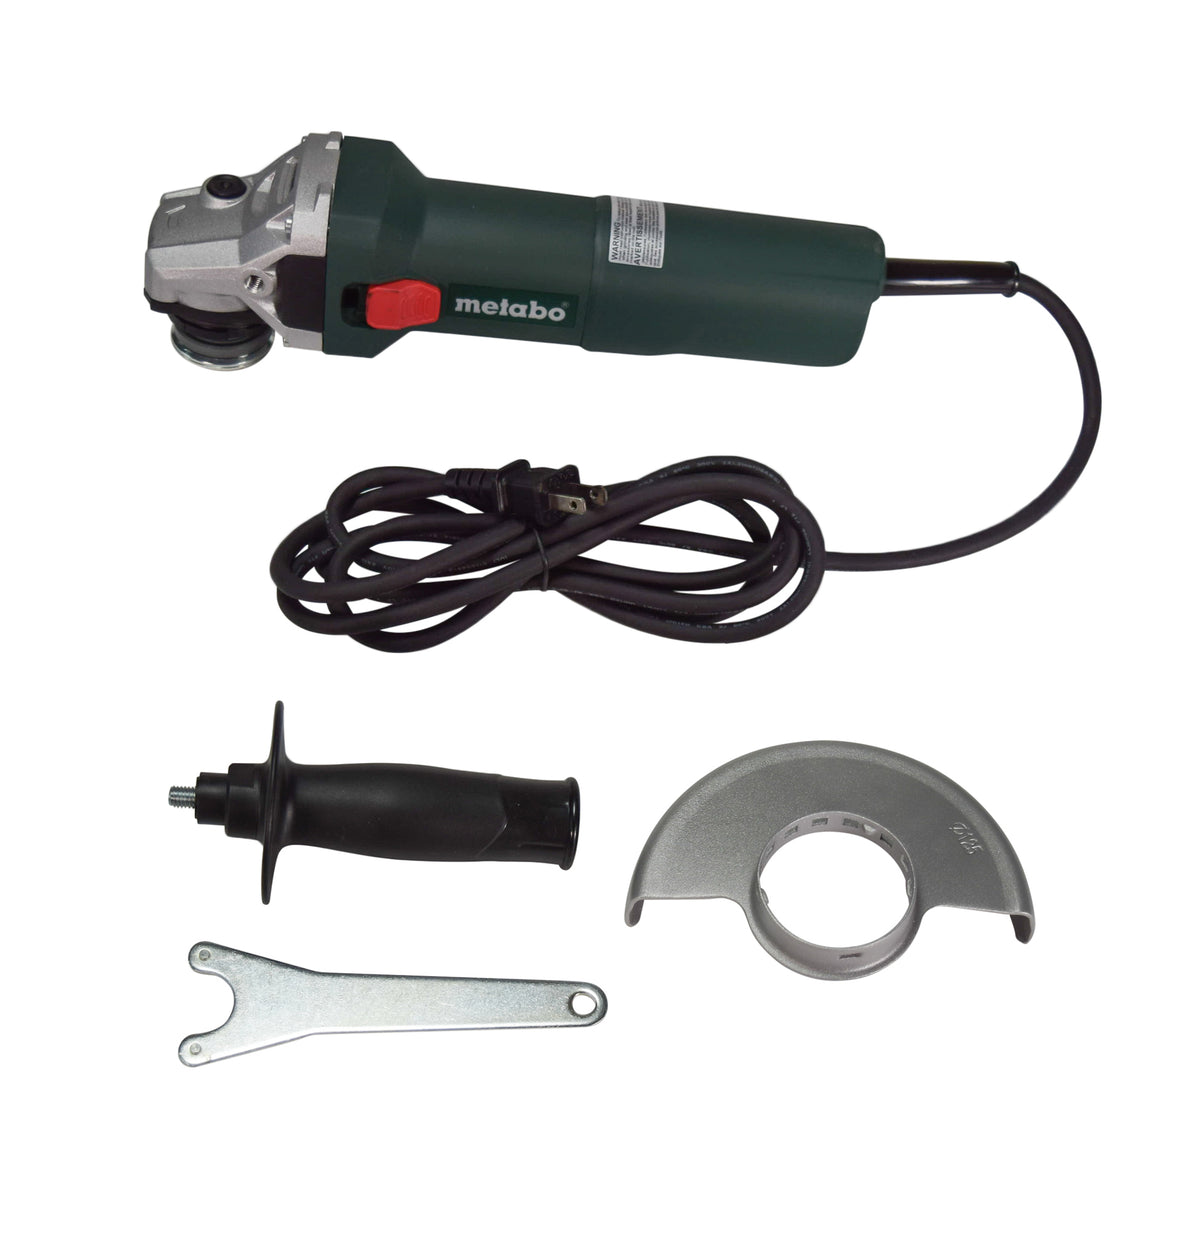 Metabo 603614420 W 1100-125 11 Amp 12,000 RPM 4.5" / 5" Corded Angle Grind (CLONE)